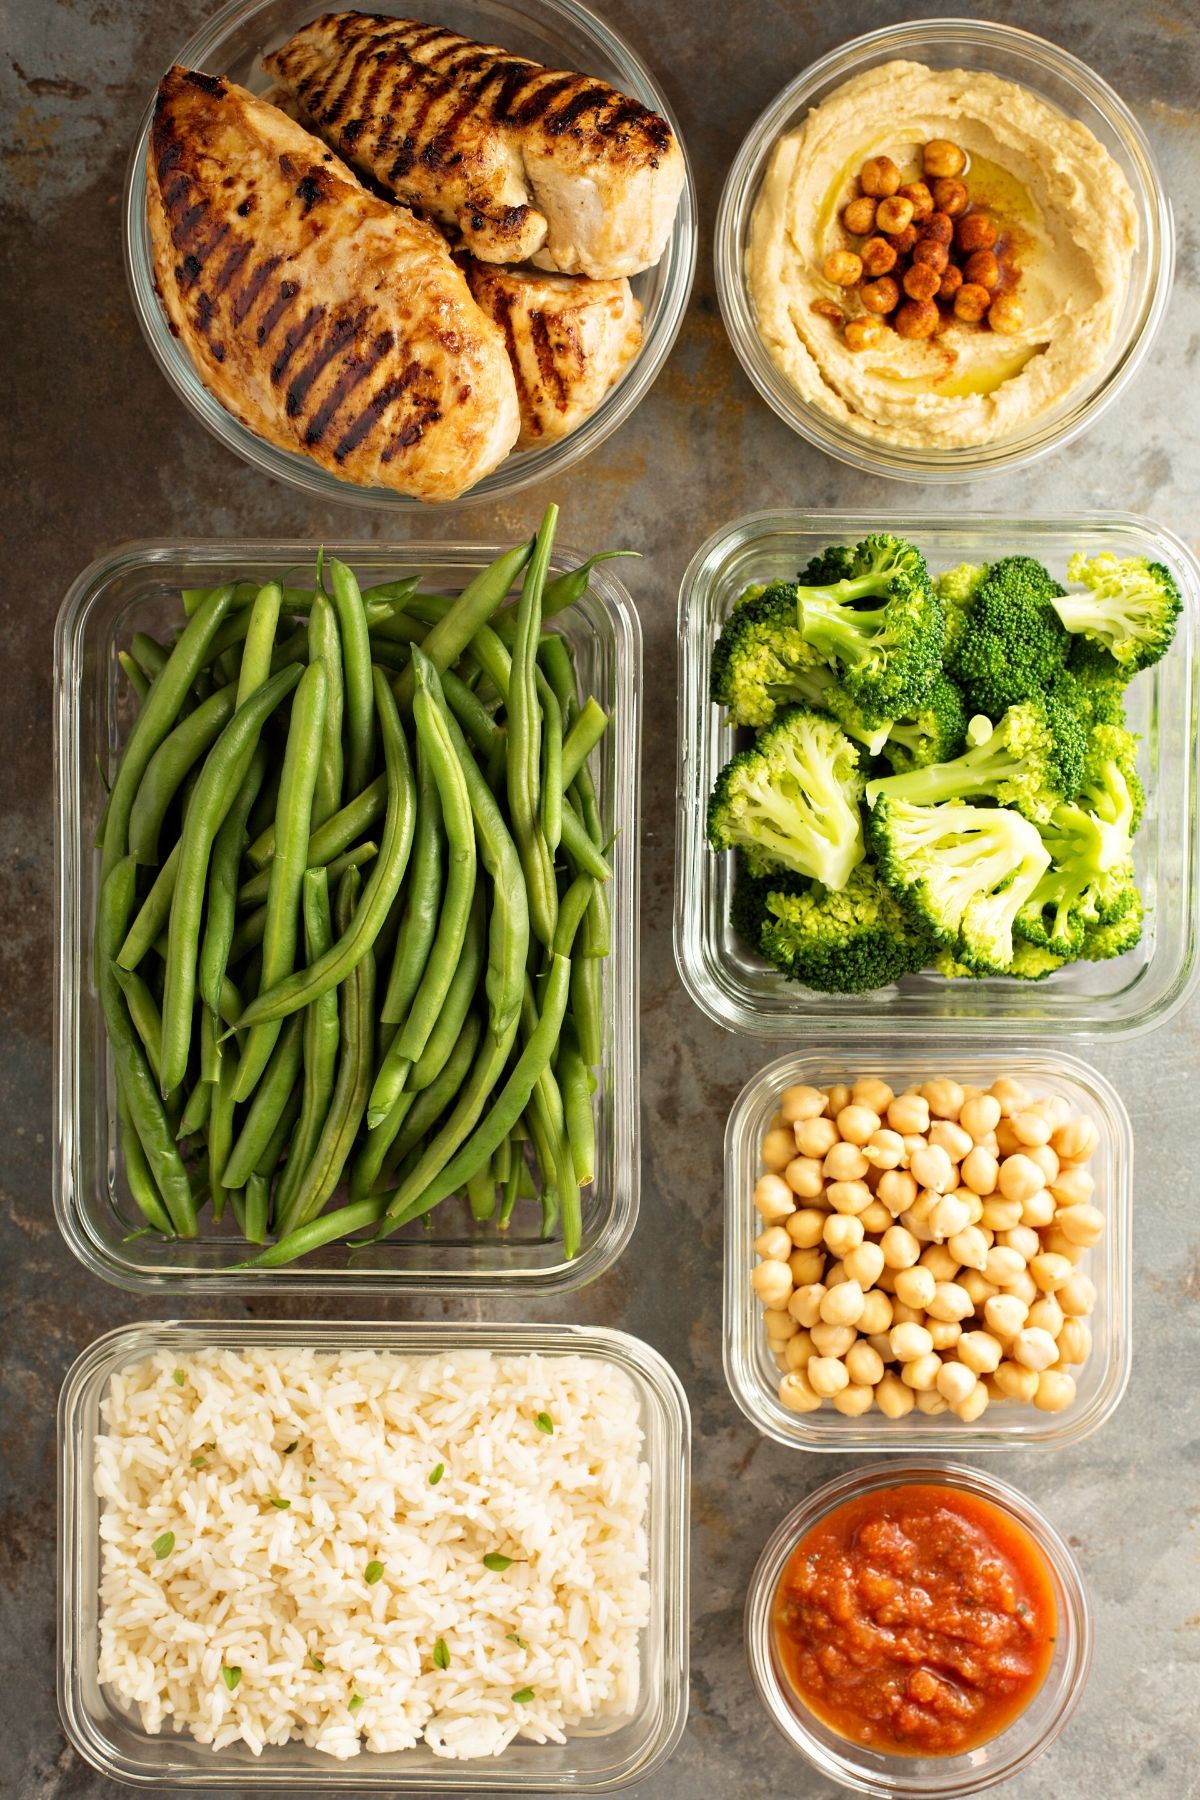 10 Meal Prep Tips Every Beginner Should Know